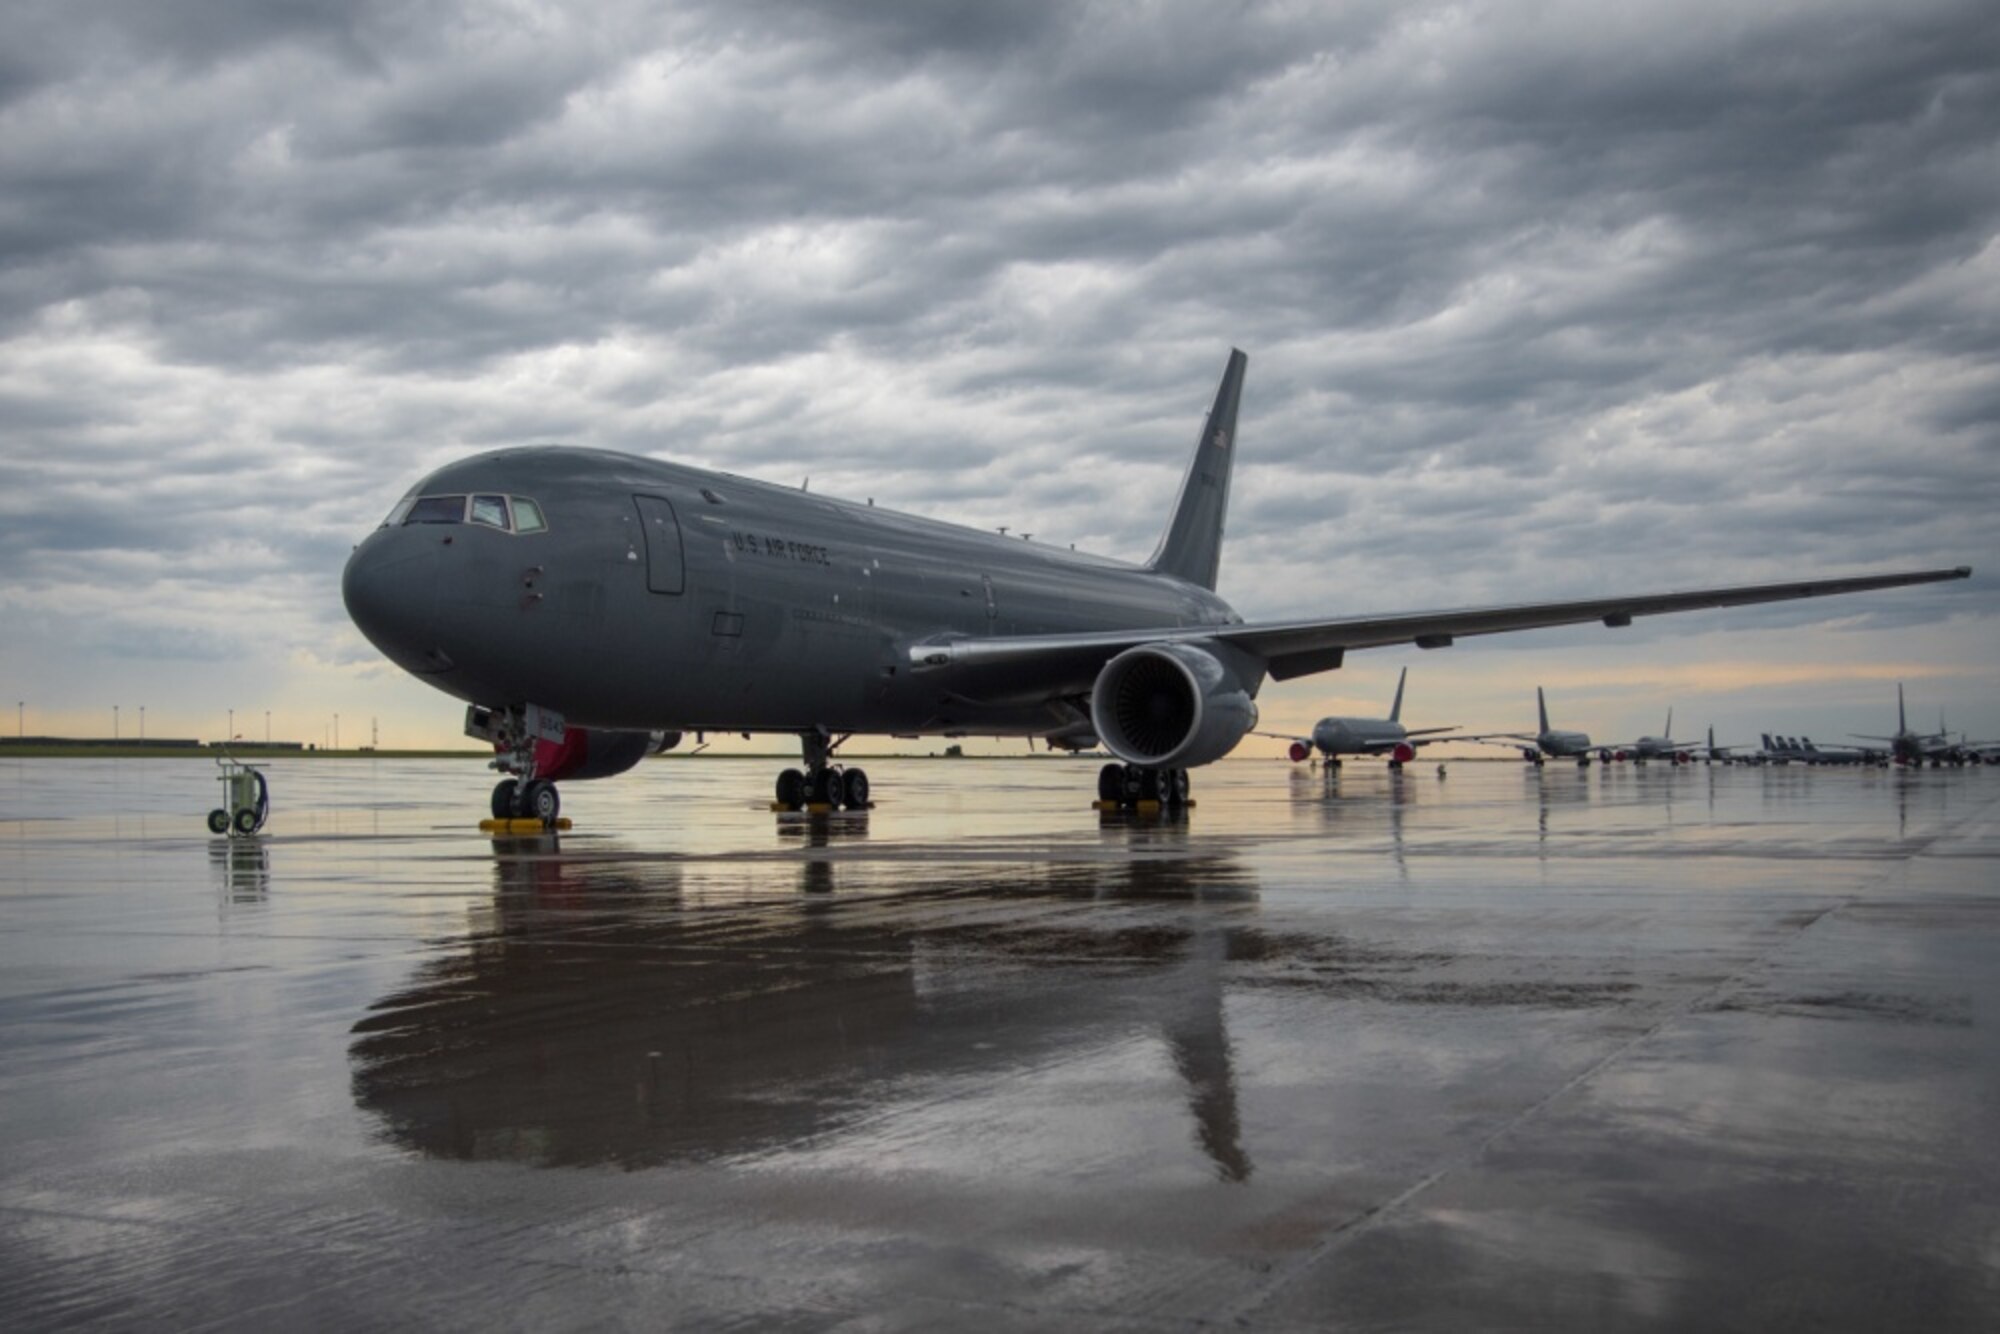 After heavy rains, a KC-46A Pegasus sits on the flightline July 9, 2020, at McConnell Air Force Base, Kansas. The 22nd Air Refueling Wing is home to KC-46 and KC-135 Stratotanker aircraft, two of three tankers used to support aerial refueling operations in the Air Force. (U.S. Air Force photo by Airman 1st Class Marc A. Garcia)